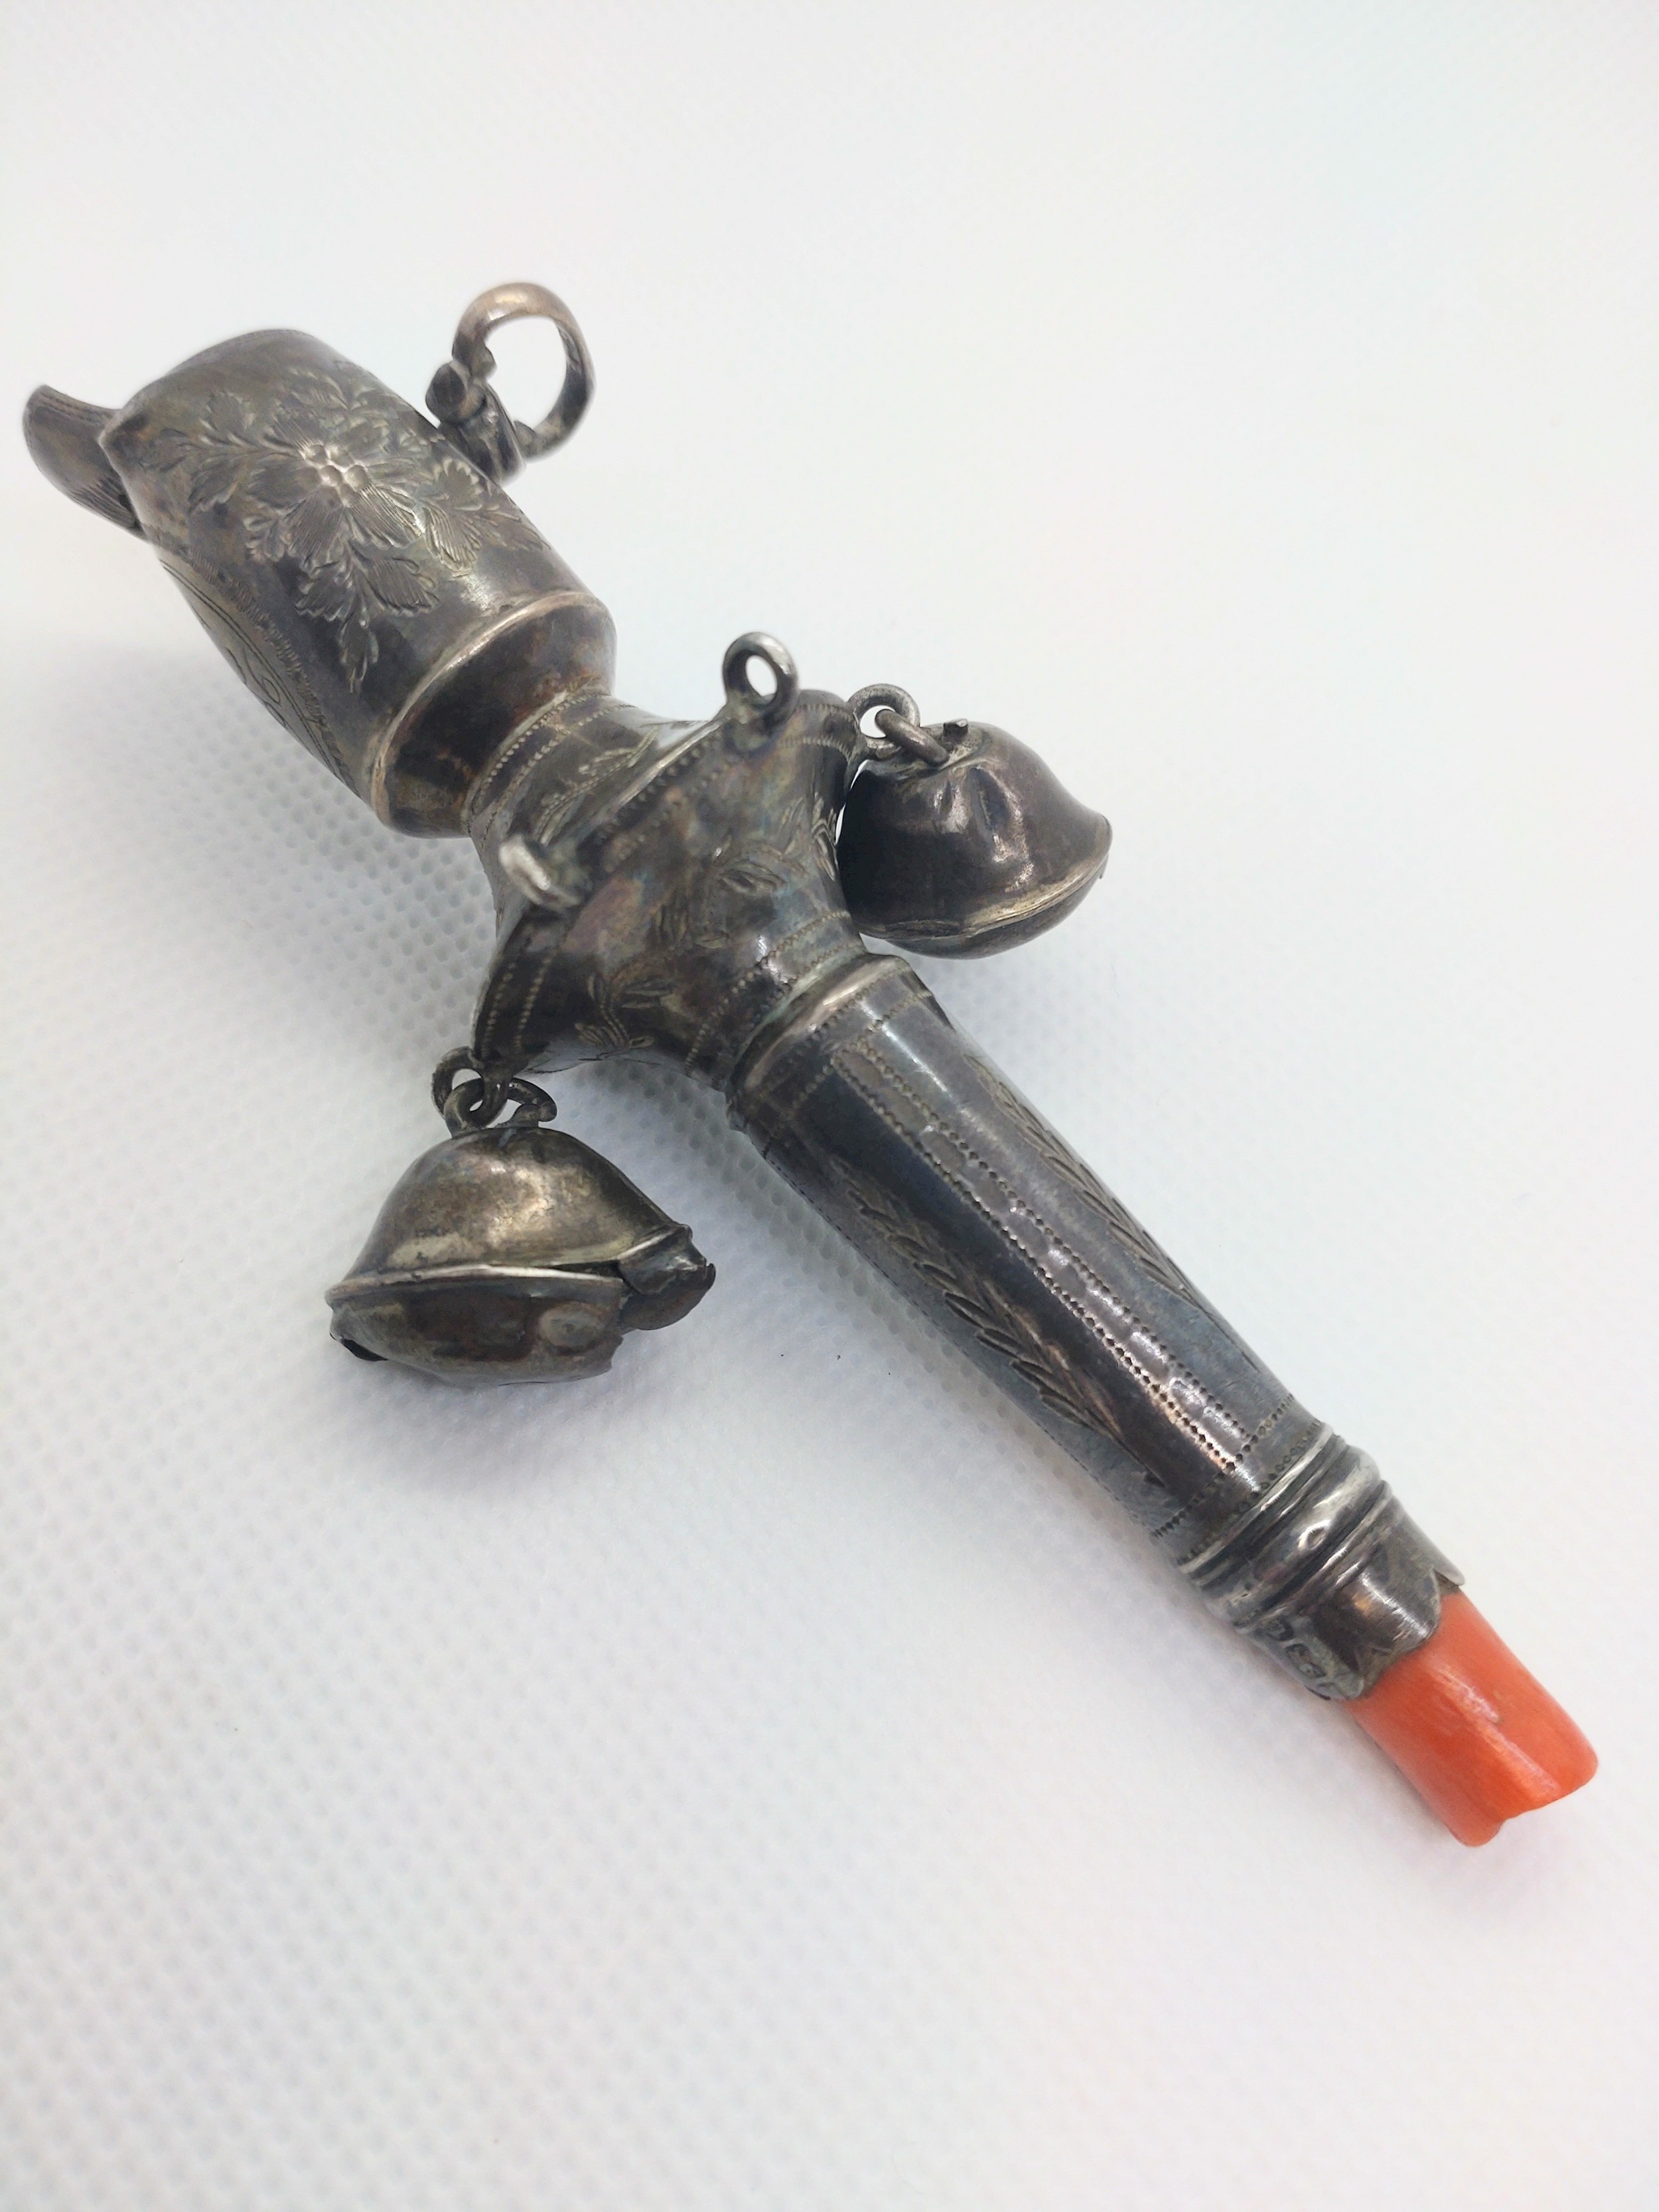 A George III sterling silver child's rattle with whistle. Engraved with the initials B.I.C 1796. A